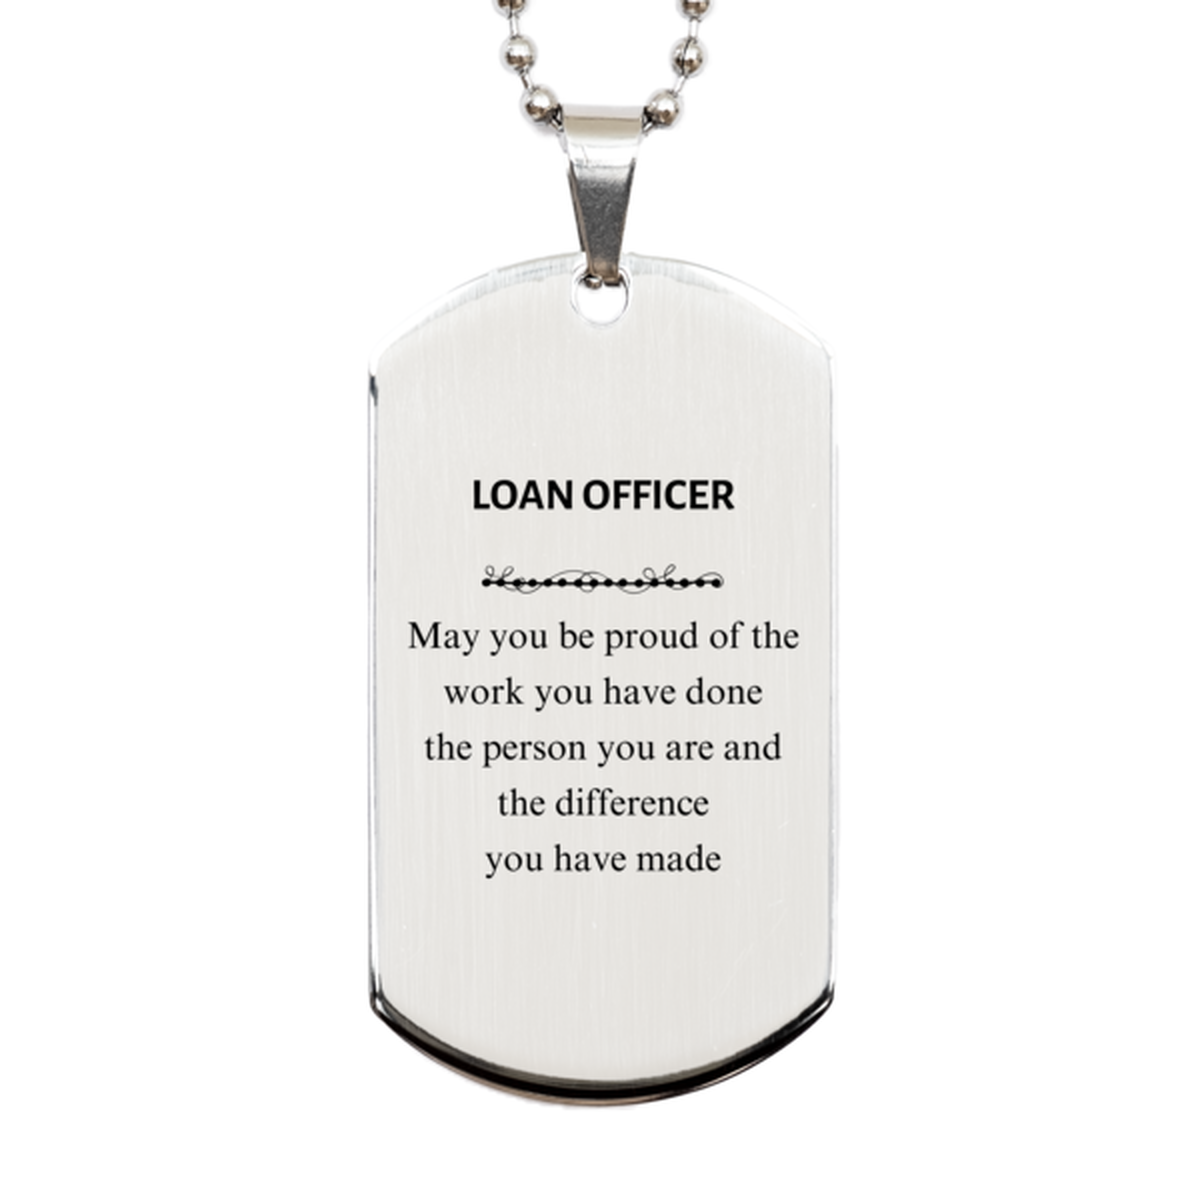 Loan Officer May you be proud of the work you have done, Retirement Loan Officer Silver Dog Tag for Colleague Appreciation Gifts Amazing for Loan Officer